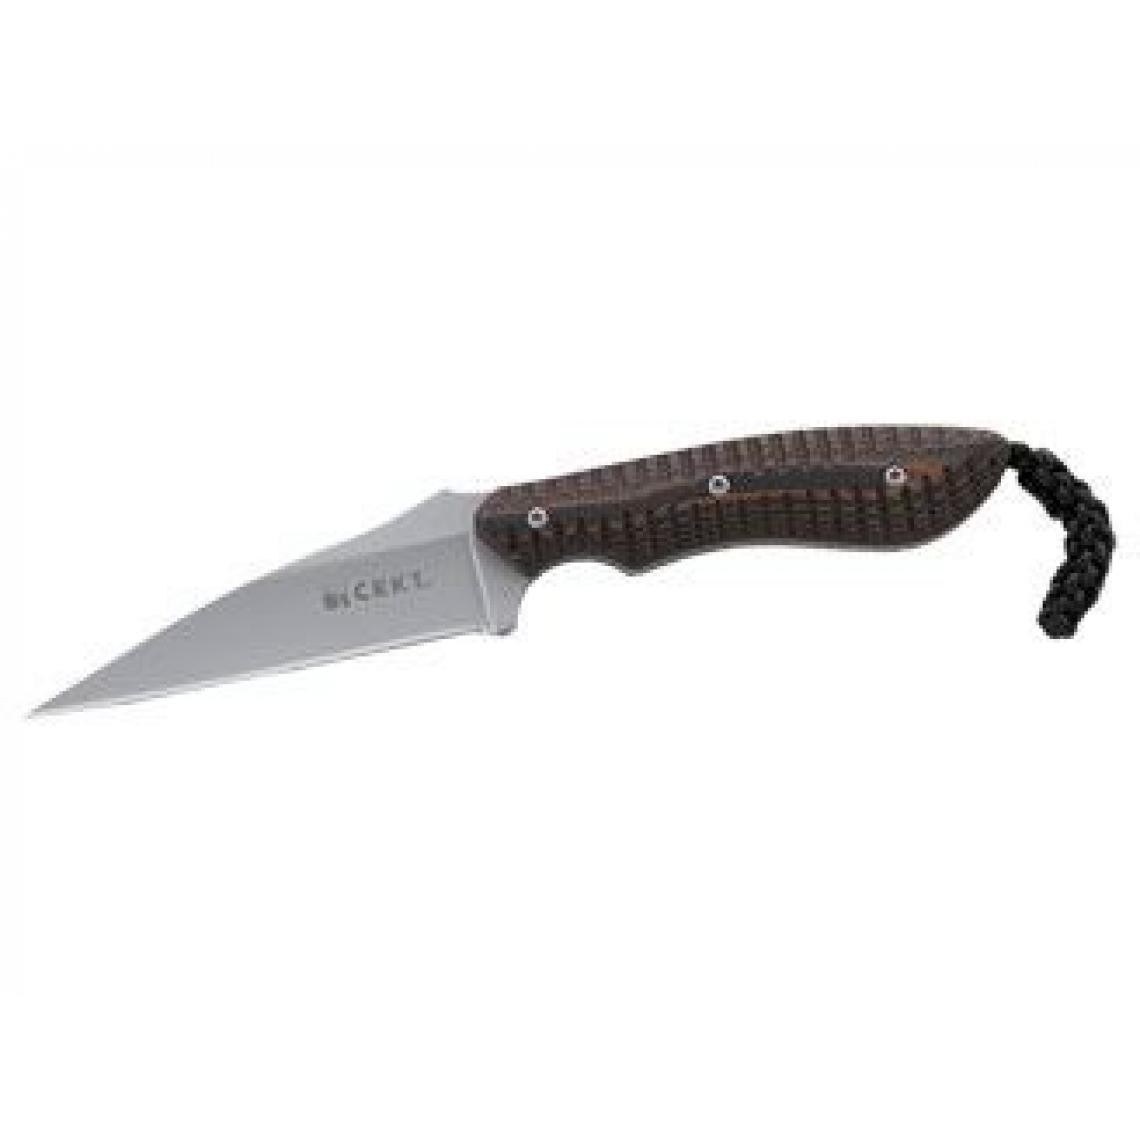 Crkt - Crkt S.P.E.W. (SMALL. POCKET. EVERYDAY. WHARNCLIFFE) 2388 - Outils de coupe